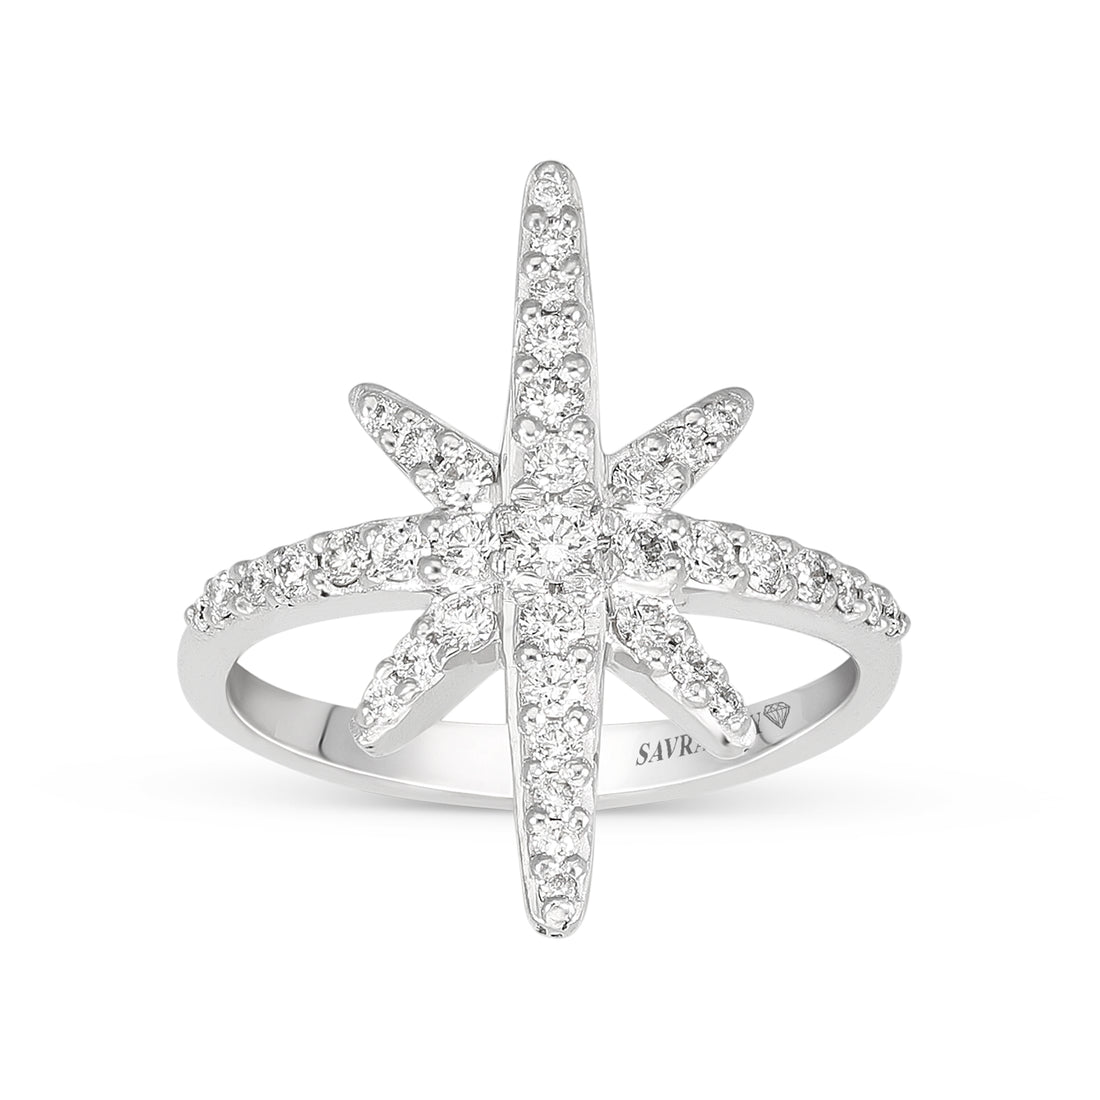 North Star Invisible Pave Diamond Elongated Ring